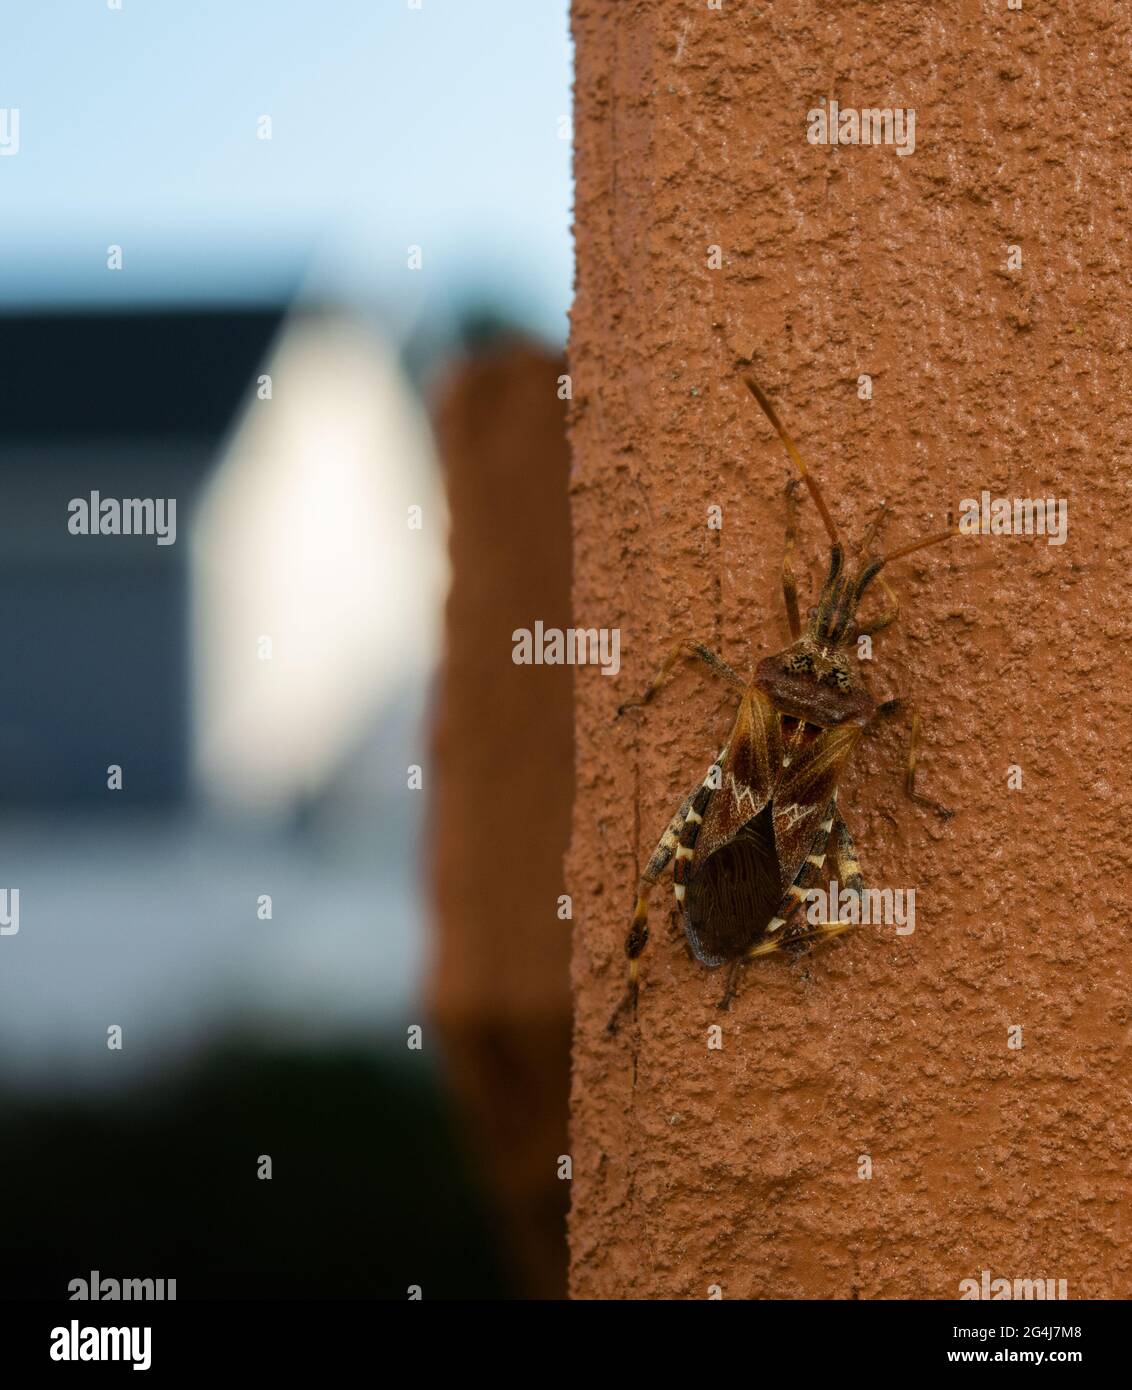 A Western Conifer Seed Bug on the side of a porch. Stock Photo